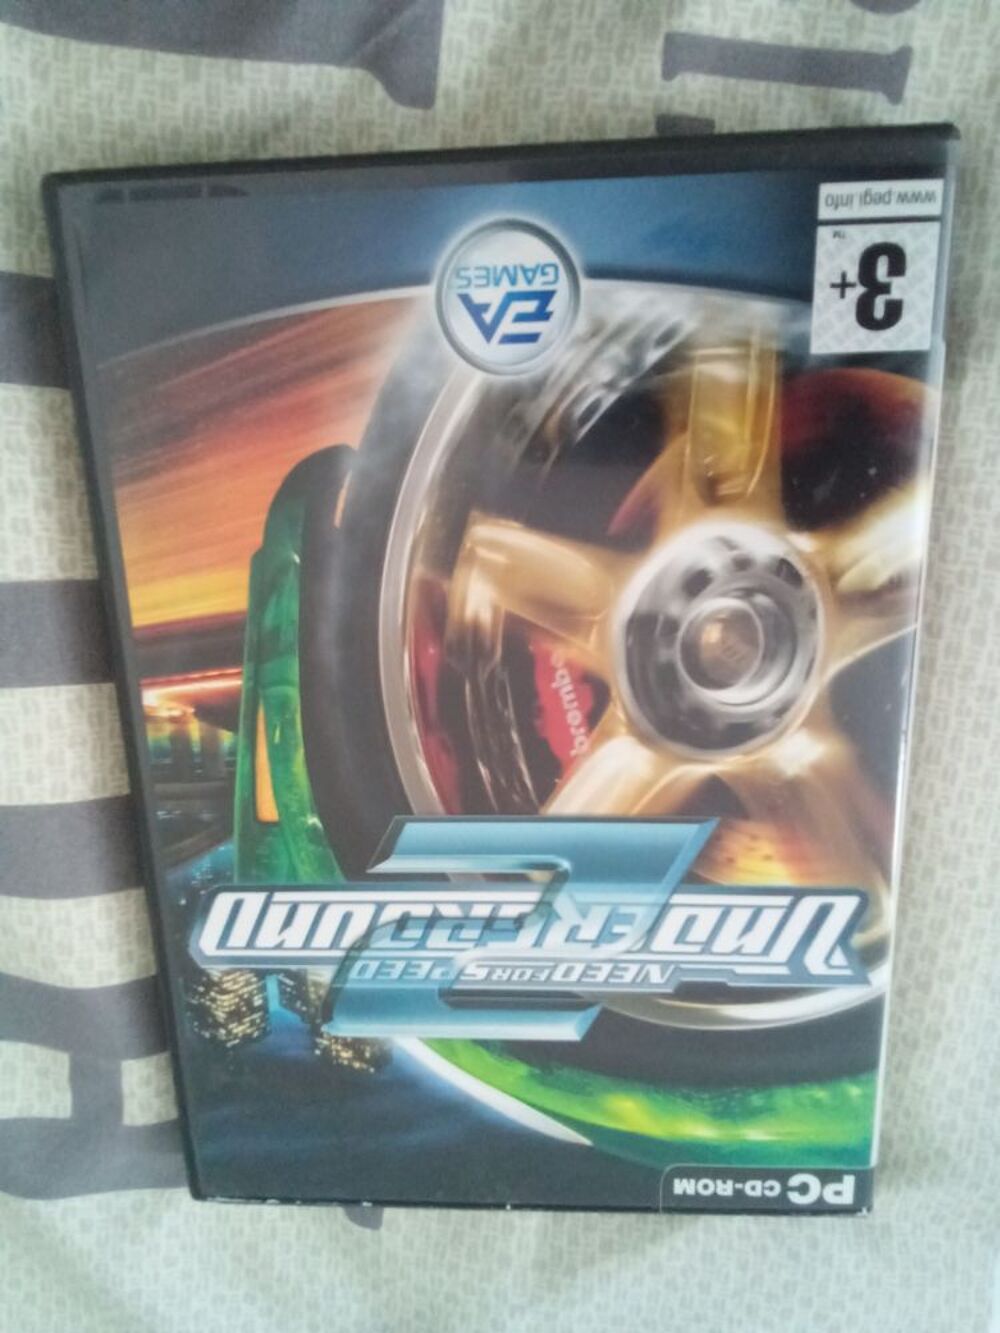 jeux PC Need for Speed underground 2 Consoles et jeux vidos